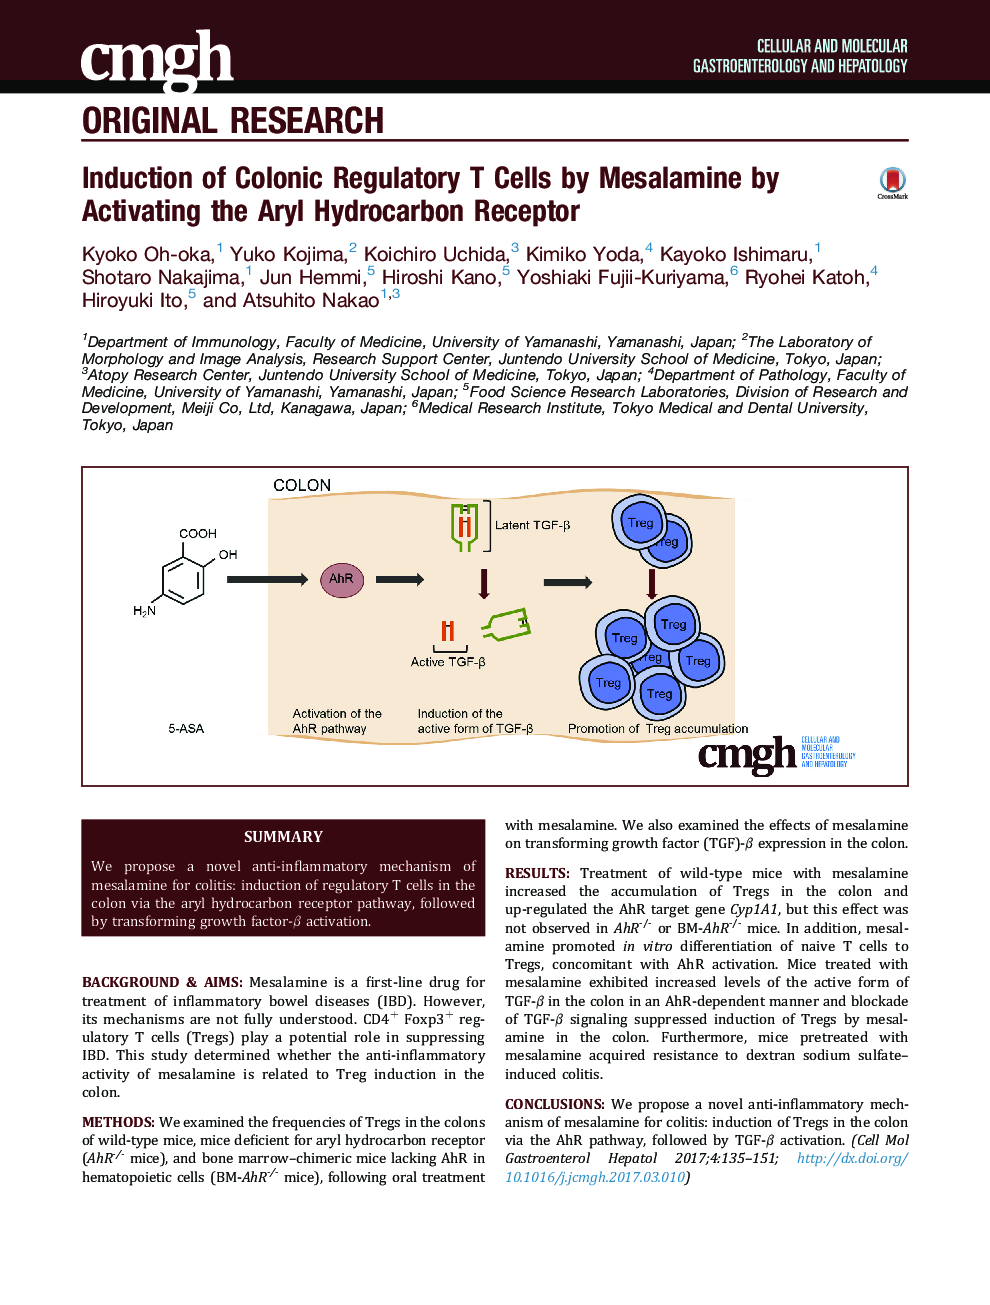 Induction of Colonic Regulatory T Cells by Mesalamine by Activating the Aryl Hydrocarbon Receptor